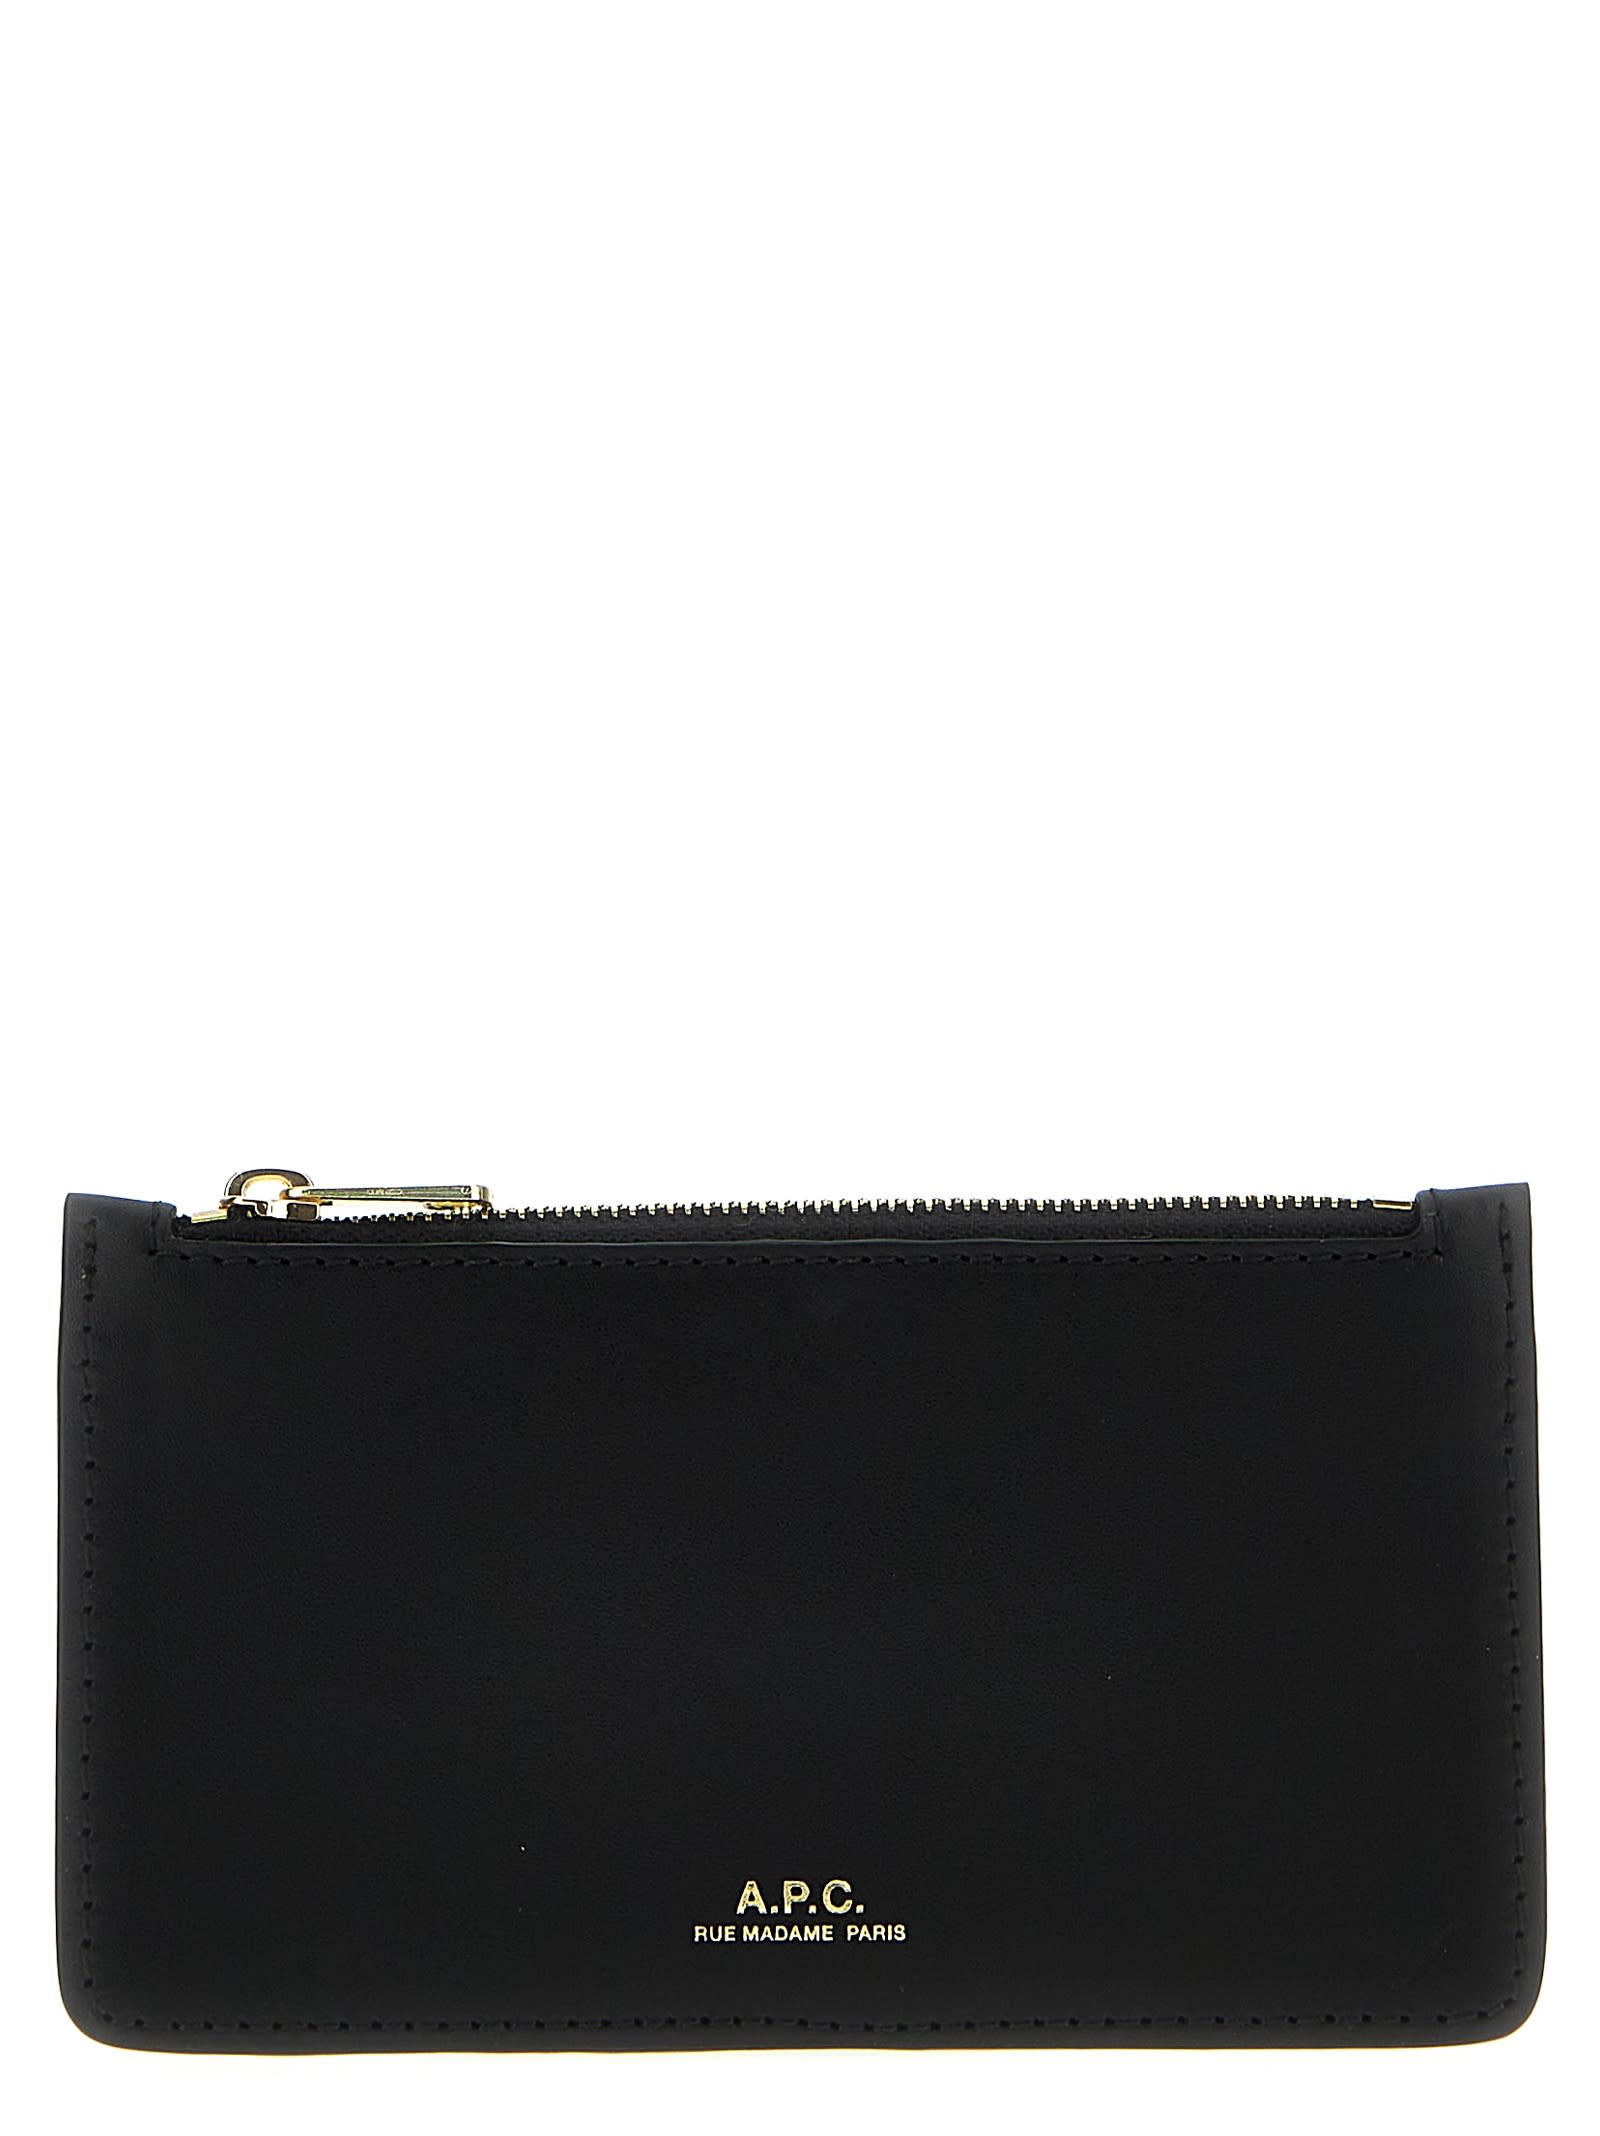 APC WILLOW CARD HOLDER